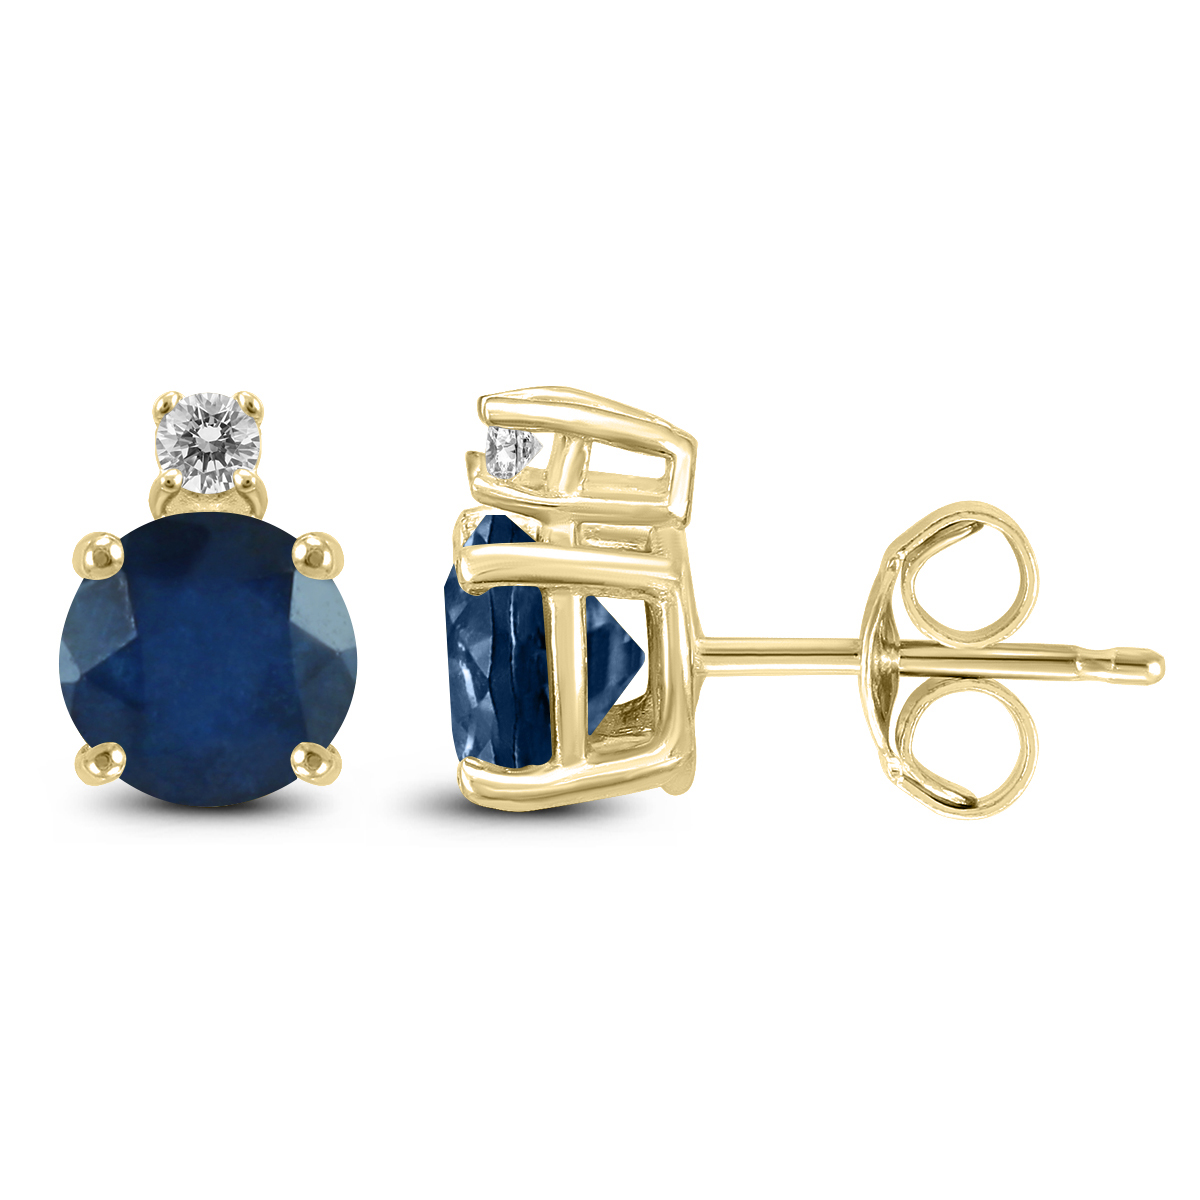 14K Yellow Gold 4MM Round Sapphire and Diamond Earrings